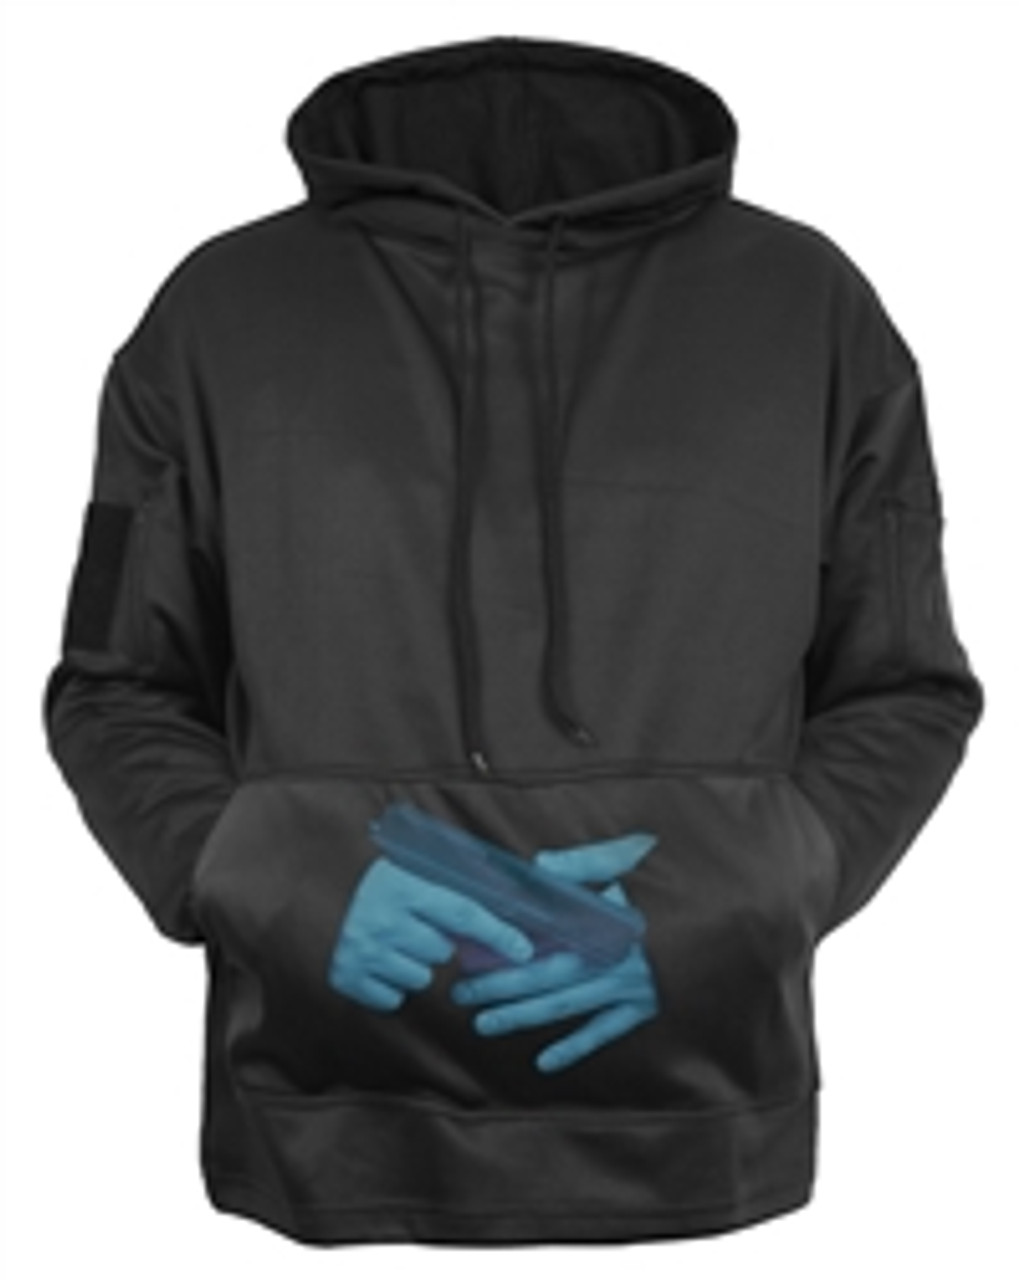 Moisture Wicking Concealed Carry Hoodie 